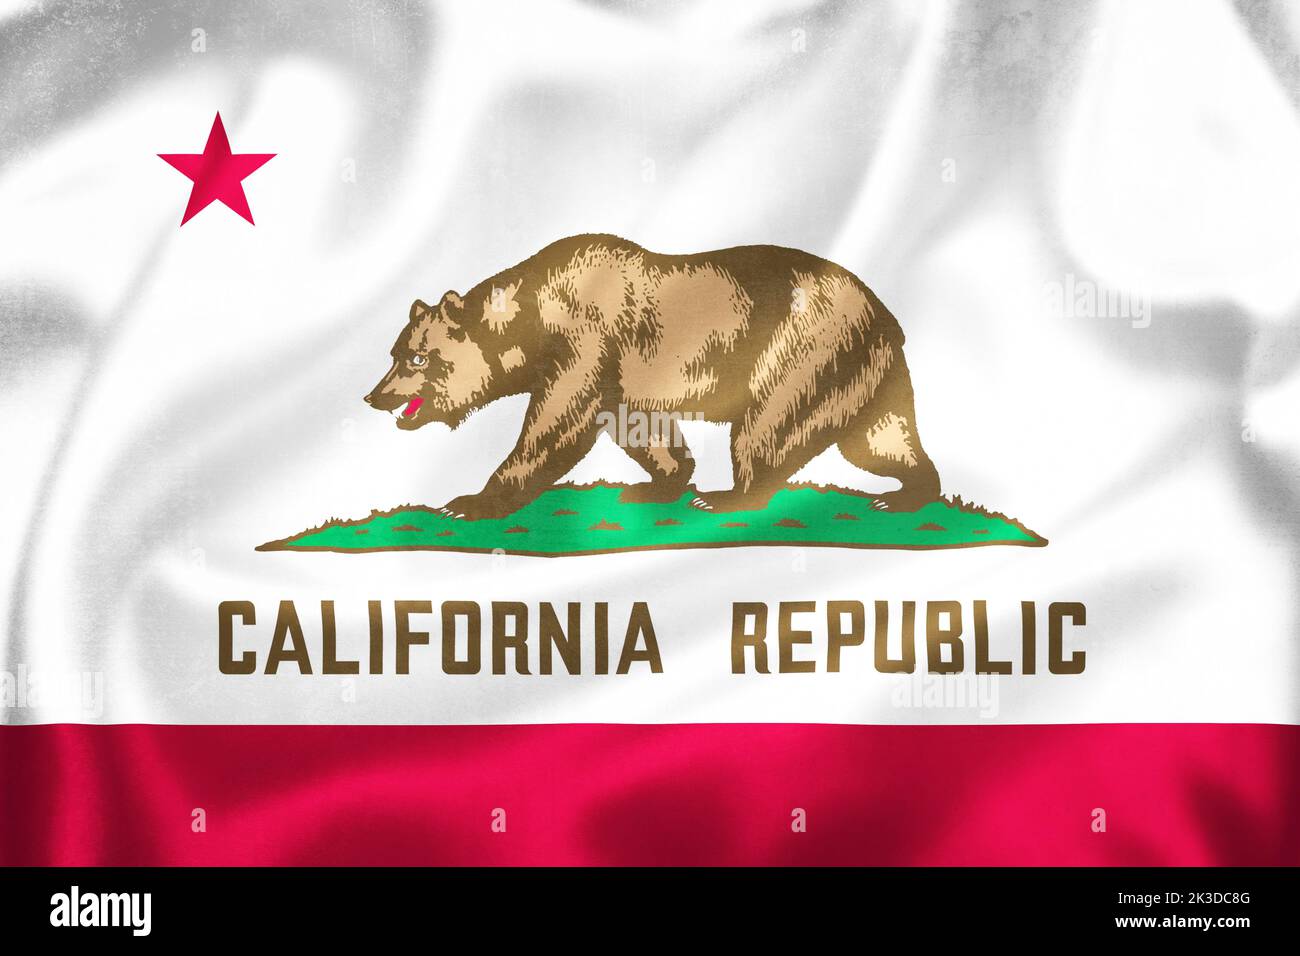 Grunge 3D illustration of California state of USA flag, concept of California Stock Photo